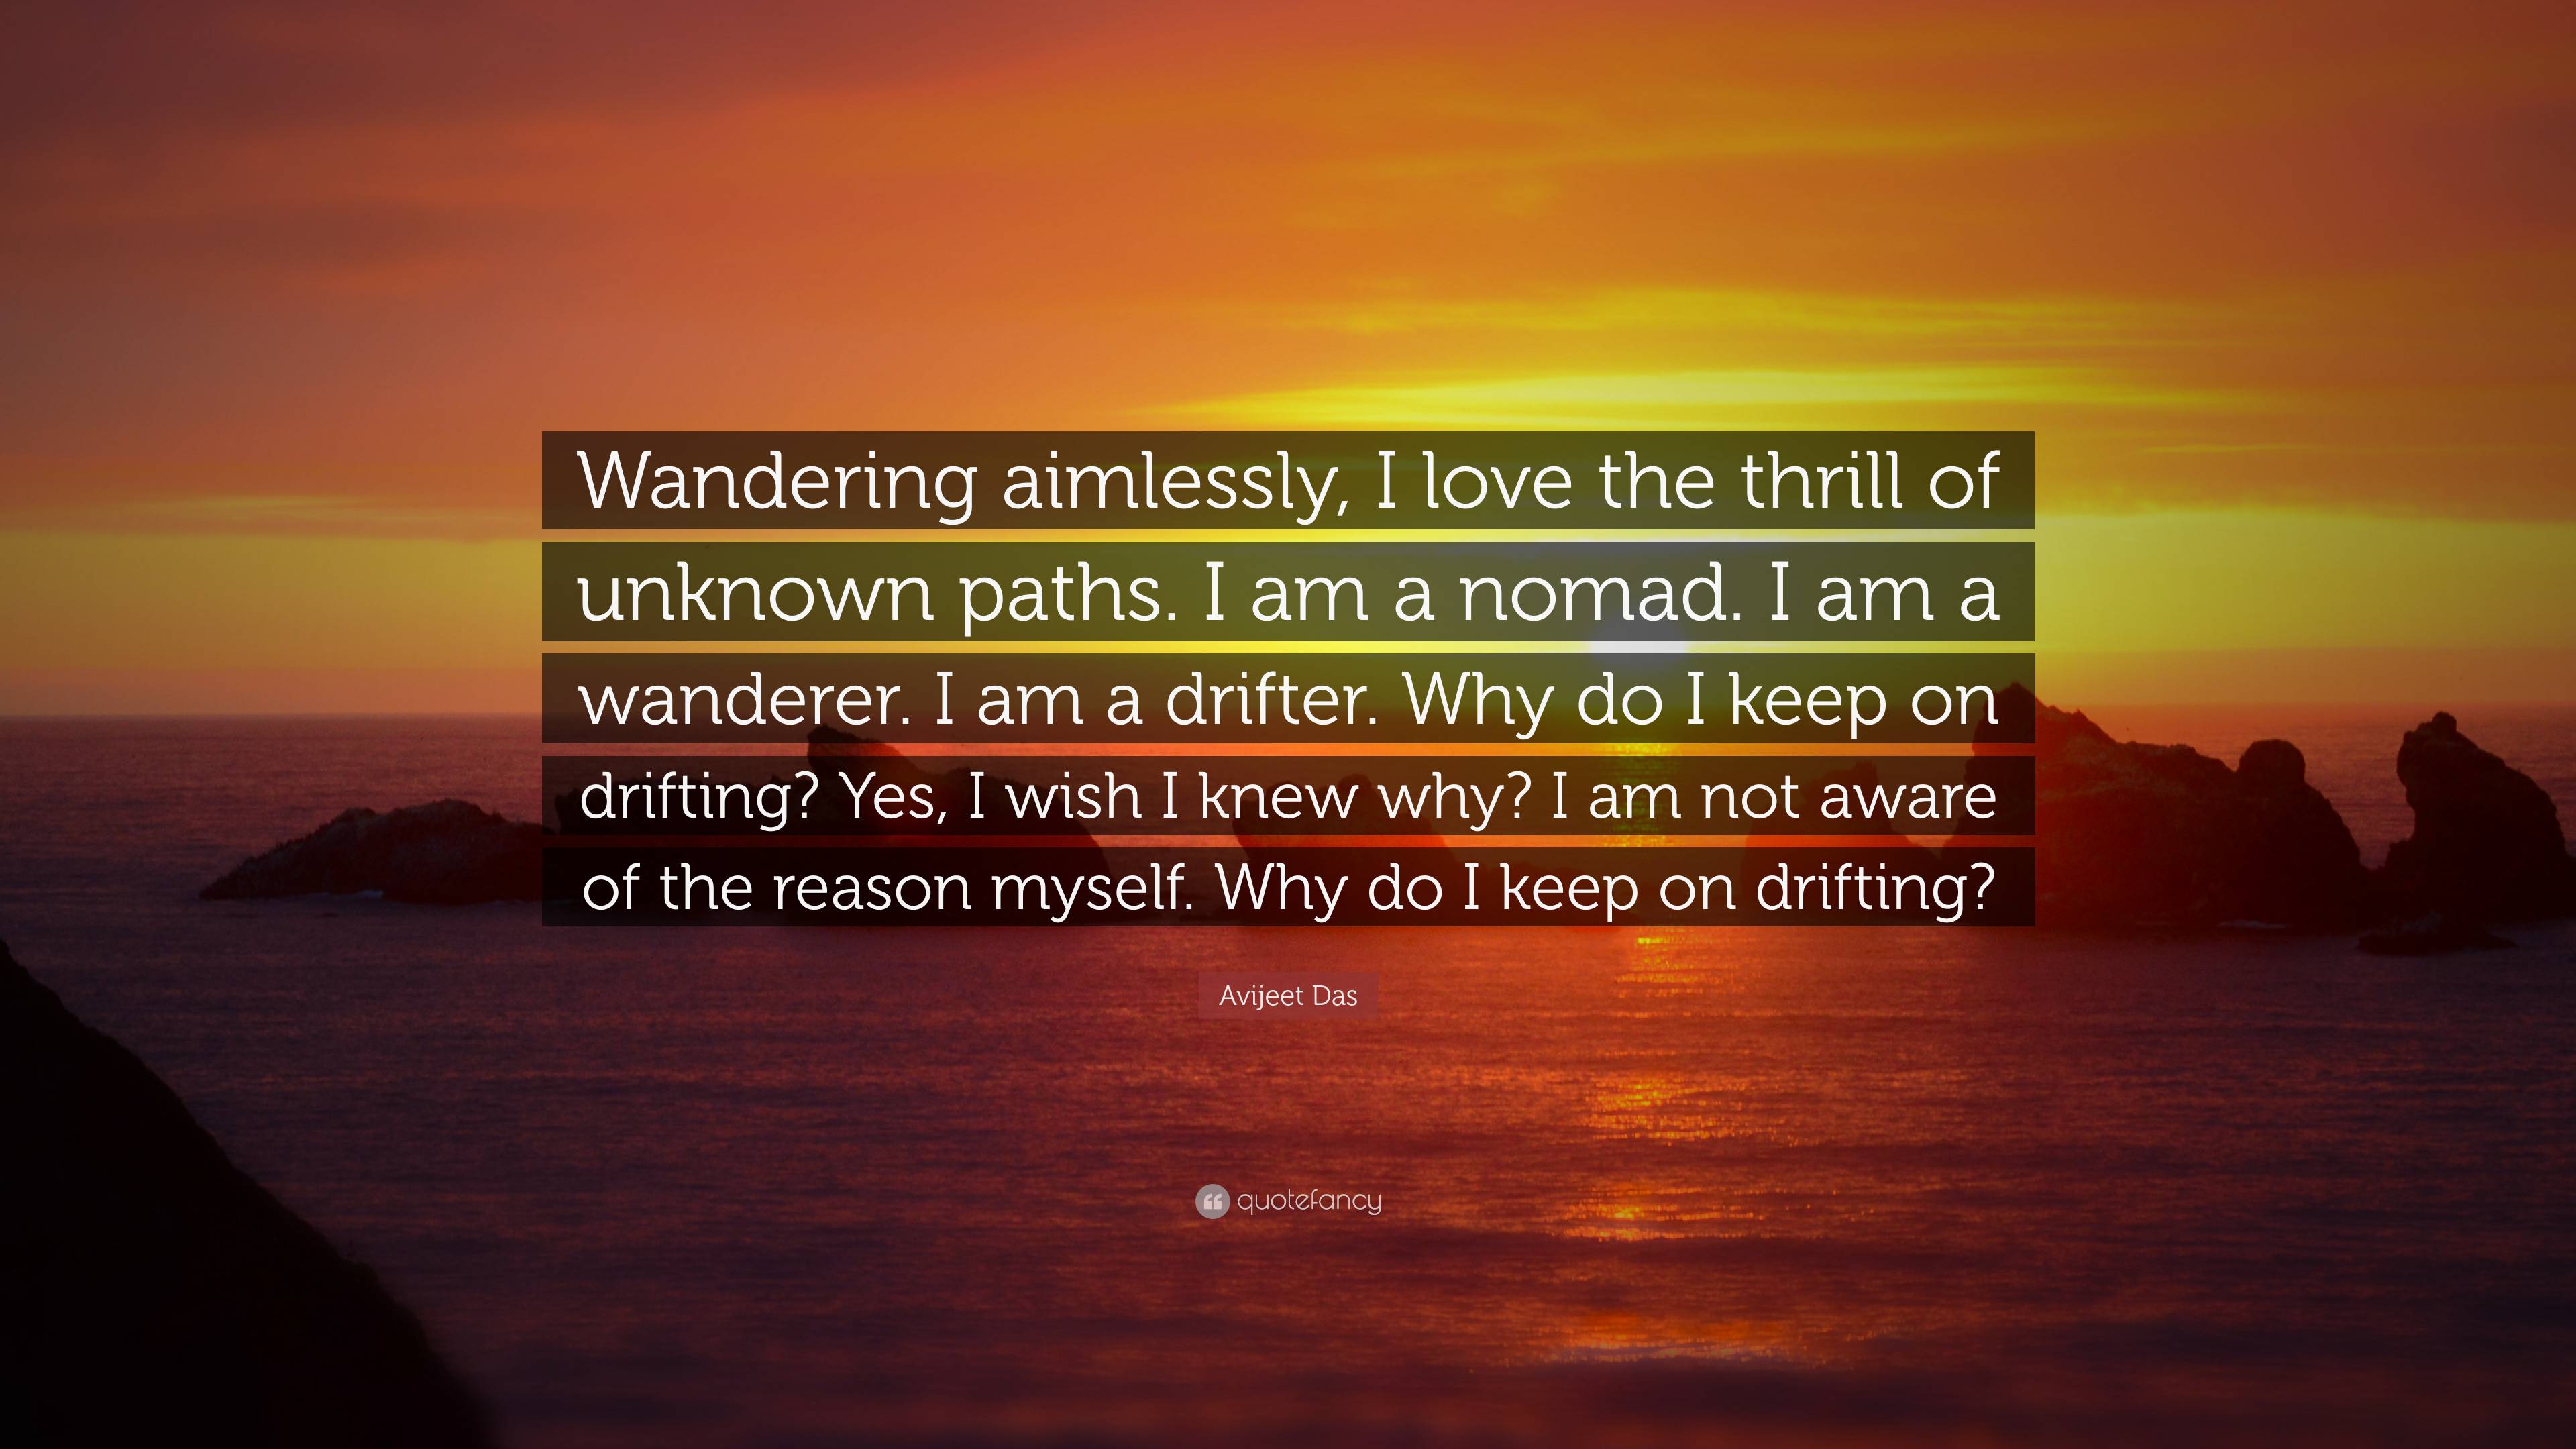 wandering aimlessly quotes